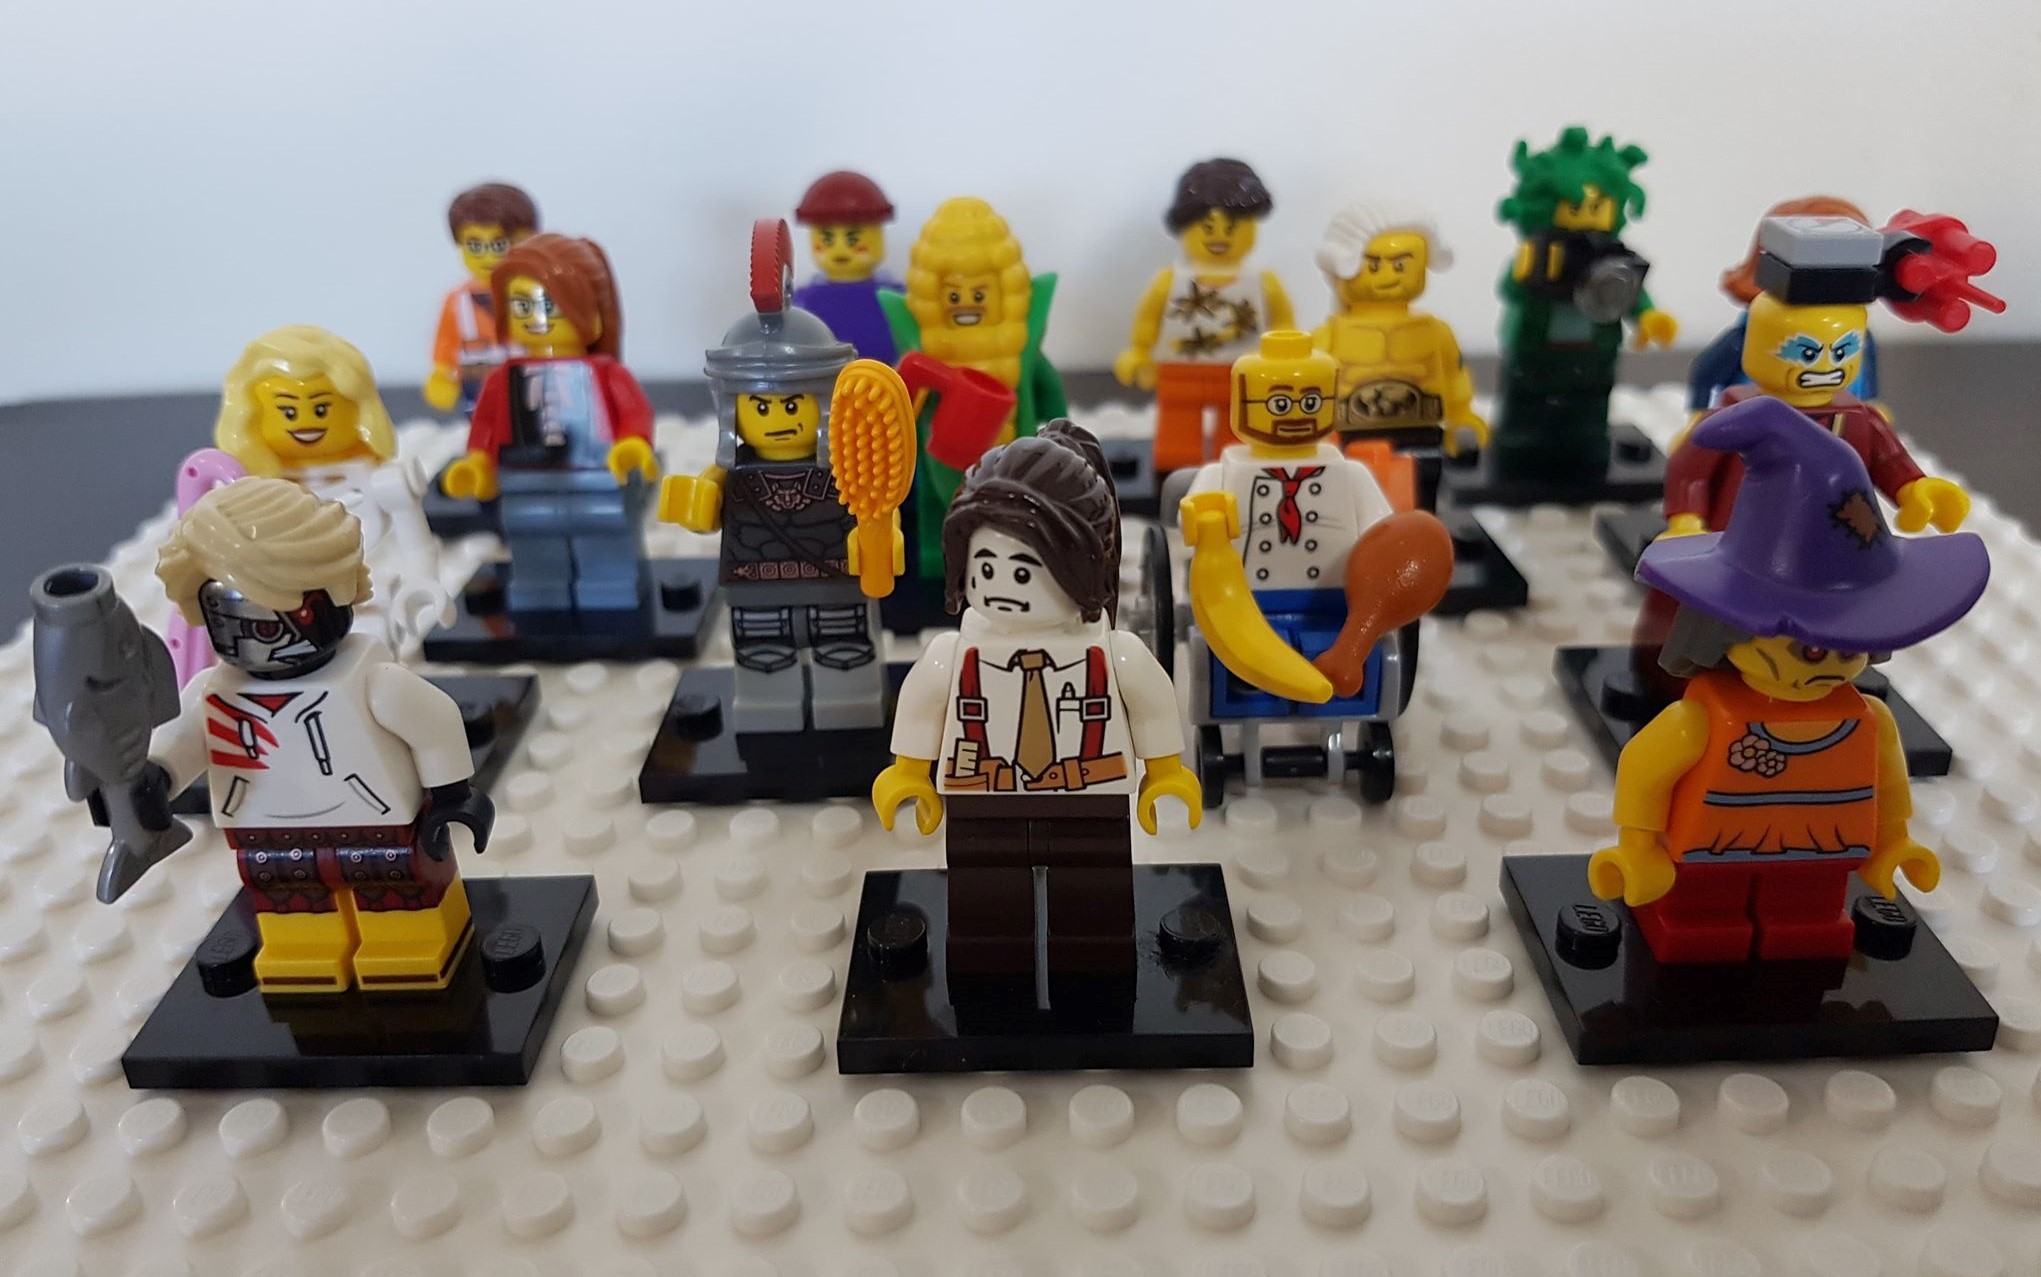 Photograph of 15 minifigures arranged in rows on a Lego baseplate. The figures are composed of a mishmash of head and body parts such as a Roman centurion, a corn cob, a Medusa and a judge's wig on a wrestler's body, and many are also holding accessories such as a banana, chicken leg or hairbrush.